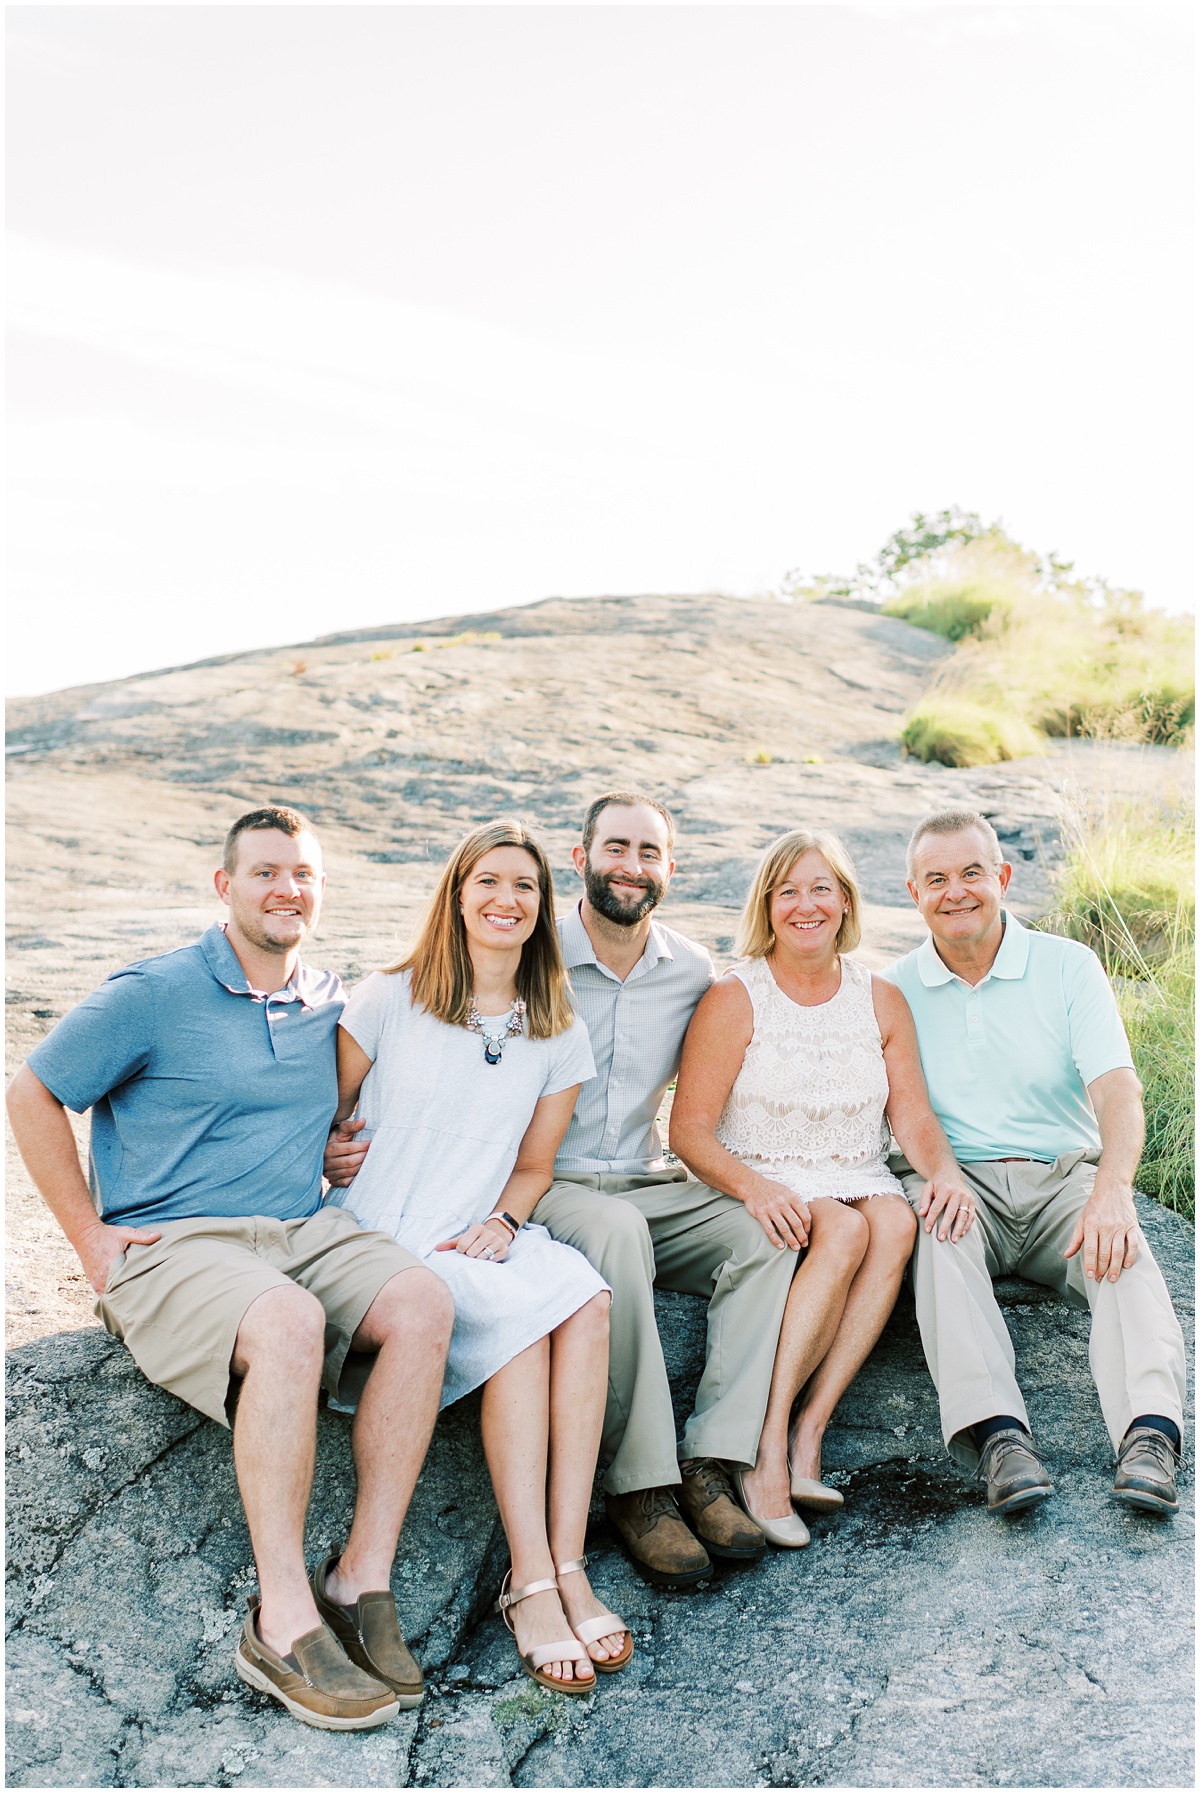 Cliffs family session at Glassy Mountain. Greenville, SC photographer.